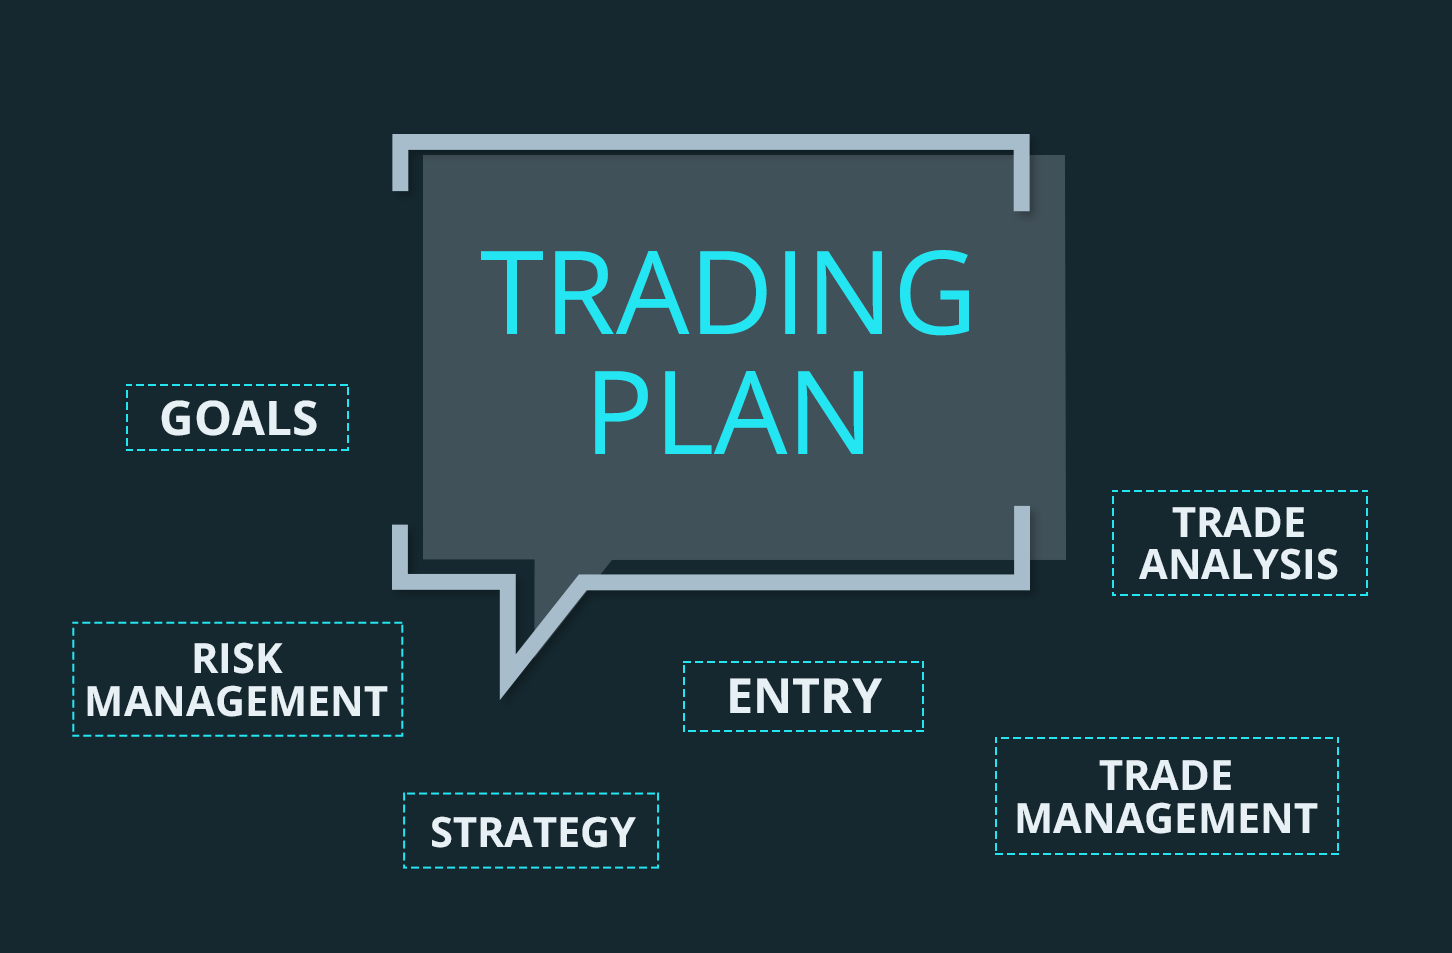 How To Construct and Write Up Forex Trading Plans | Forex Academy